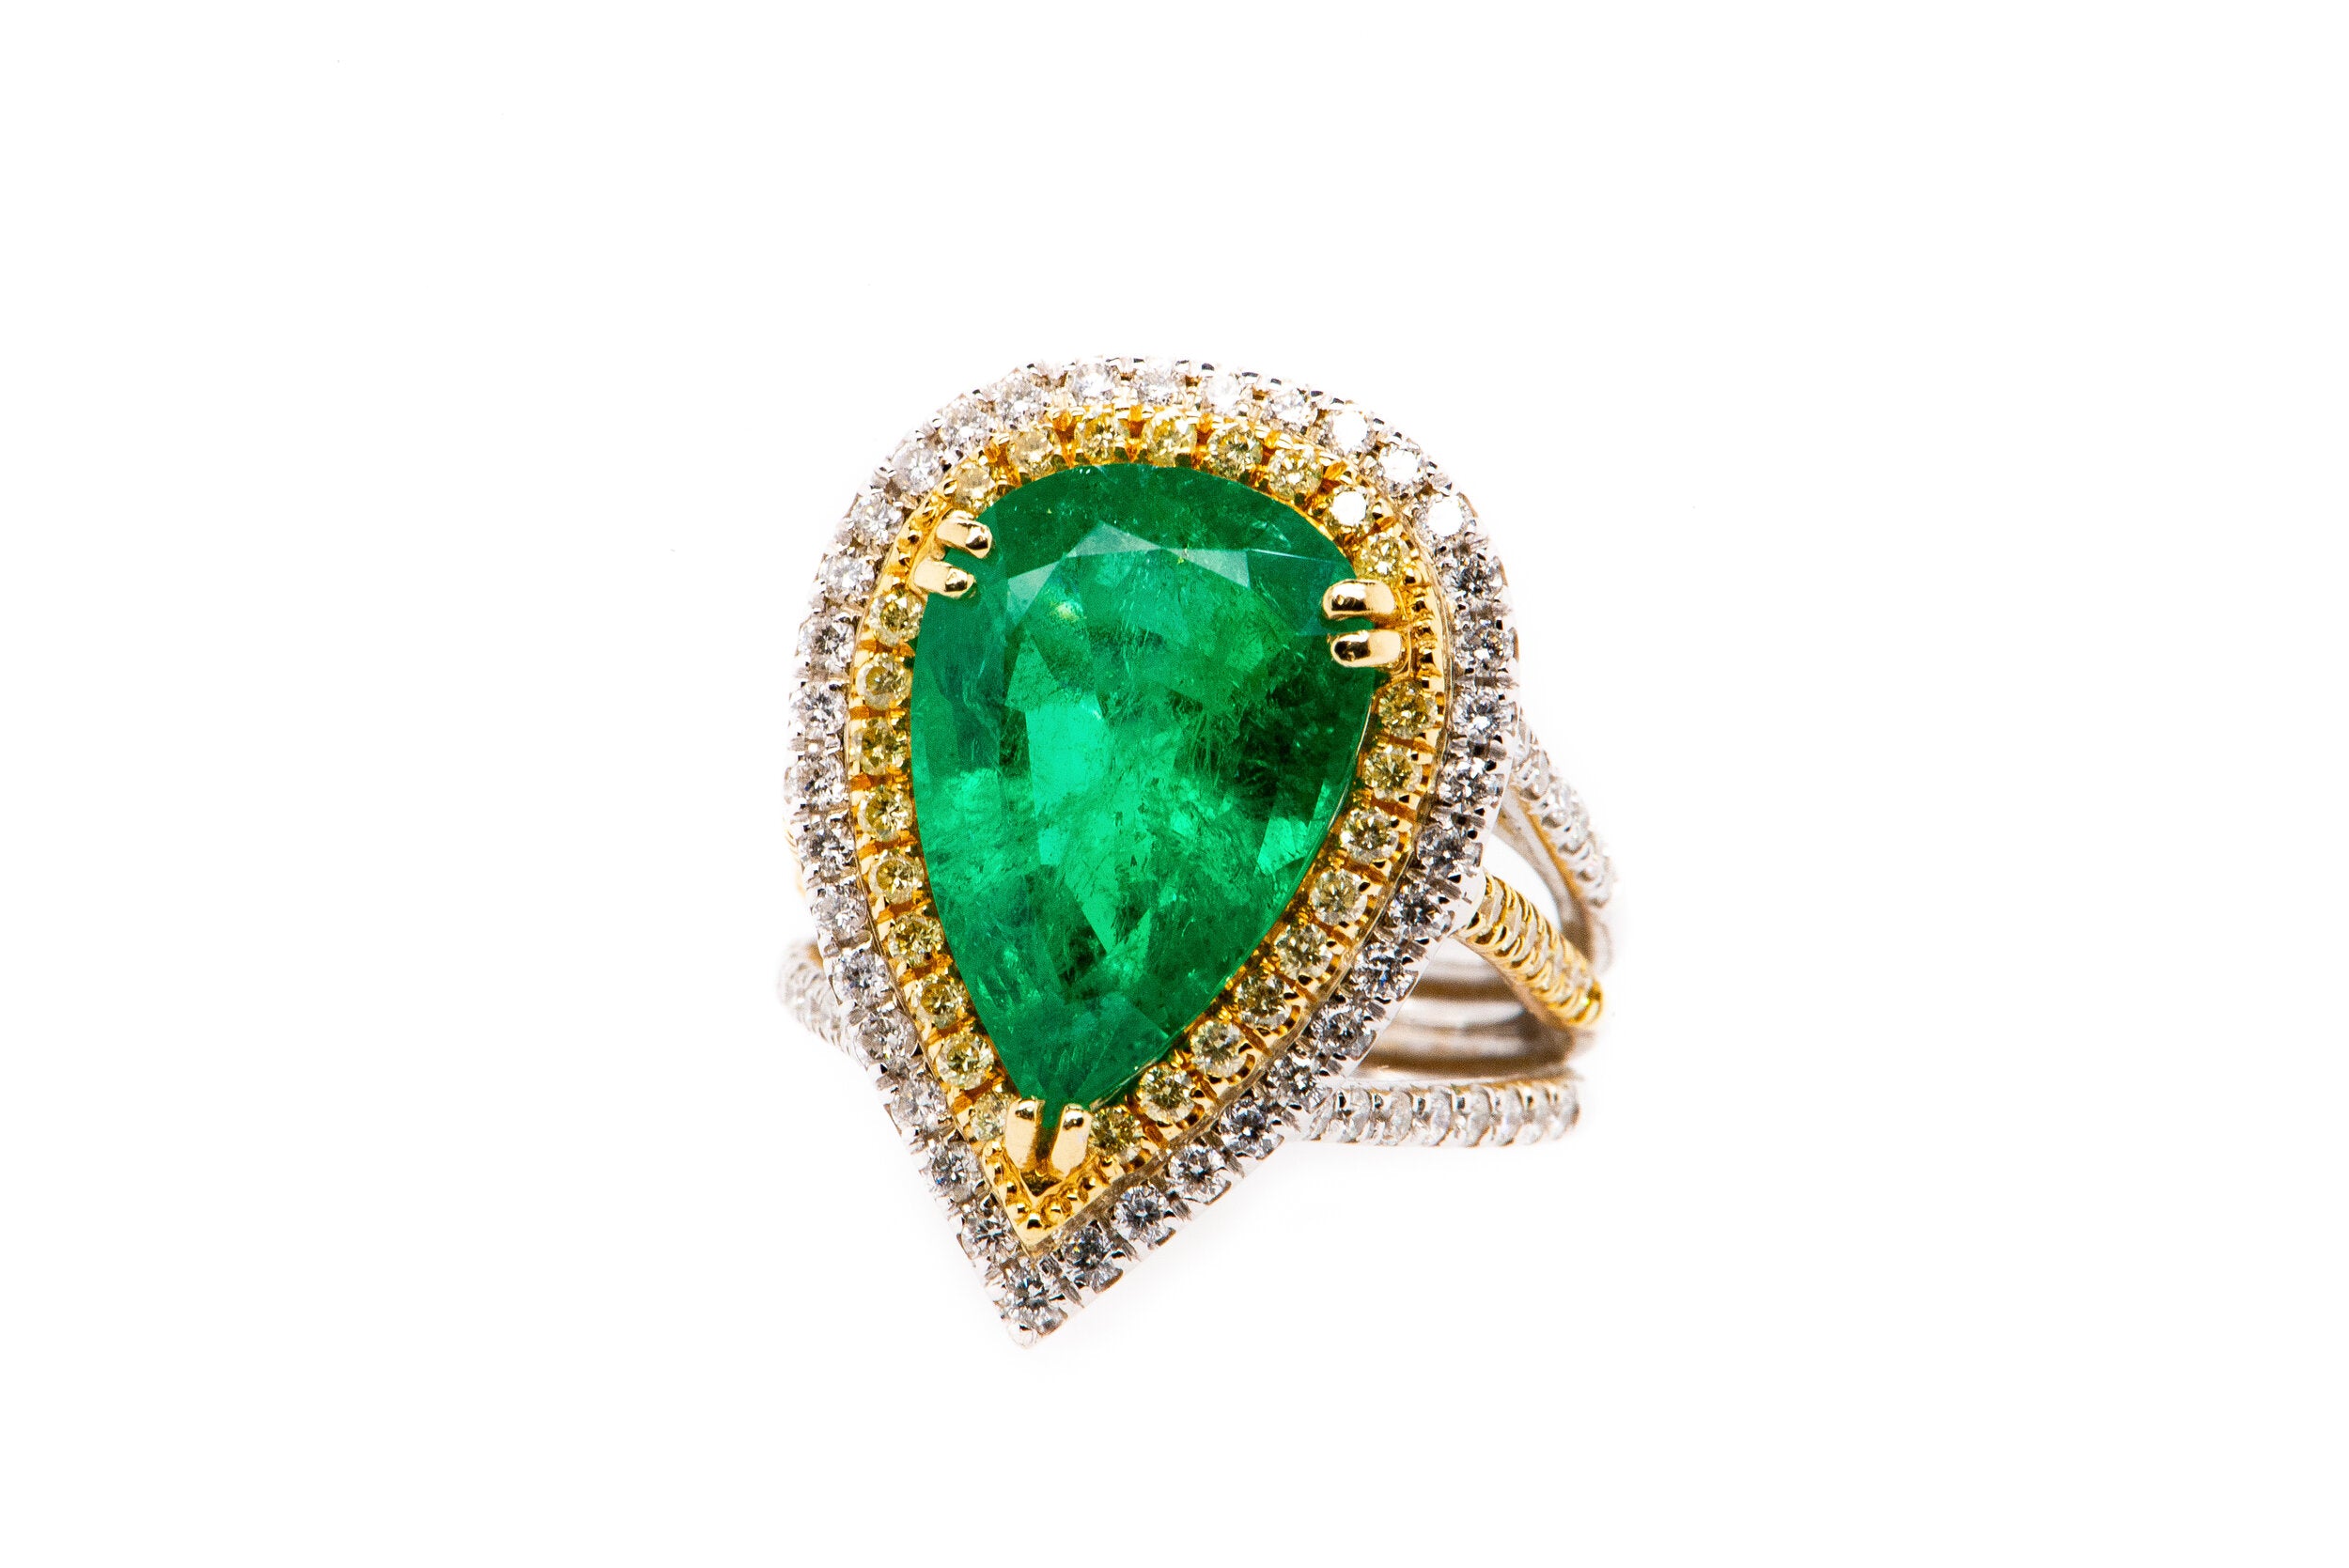 The Unique Collection: 6.91 ct Pear Shape Emerald in Two Tone Yellow and White Diamond Custom Setting